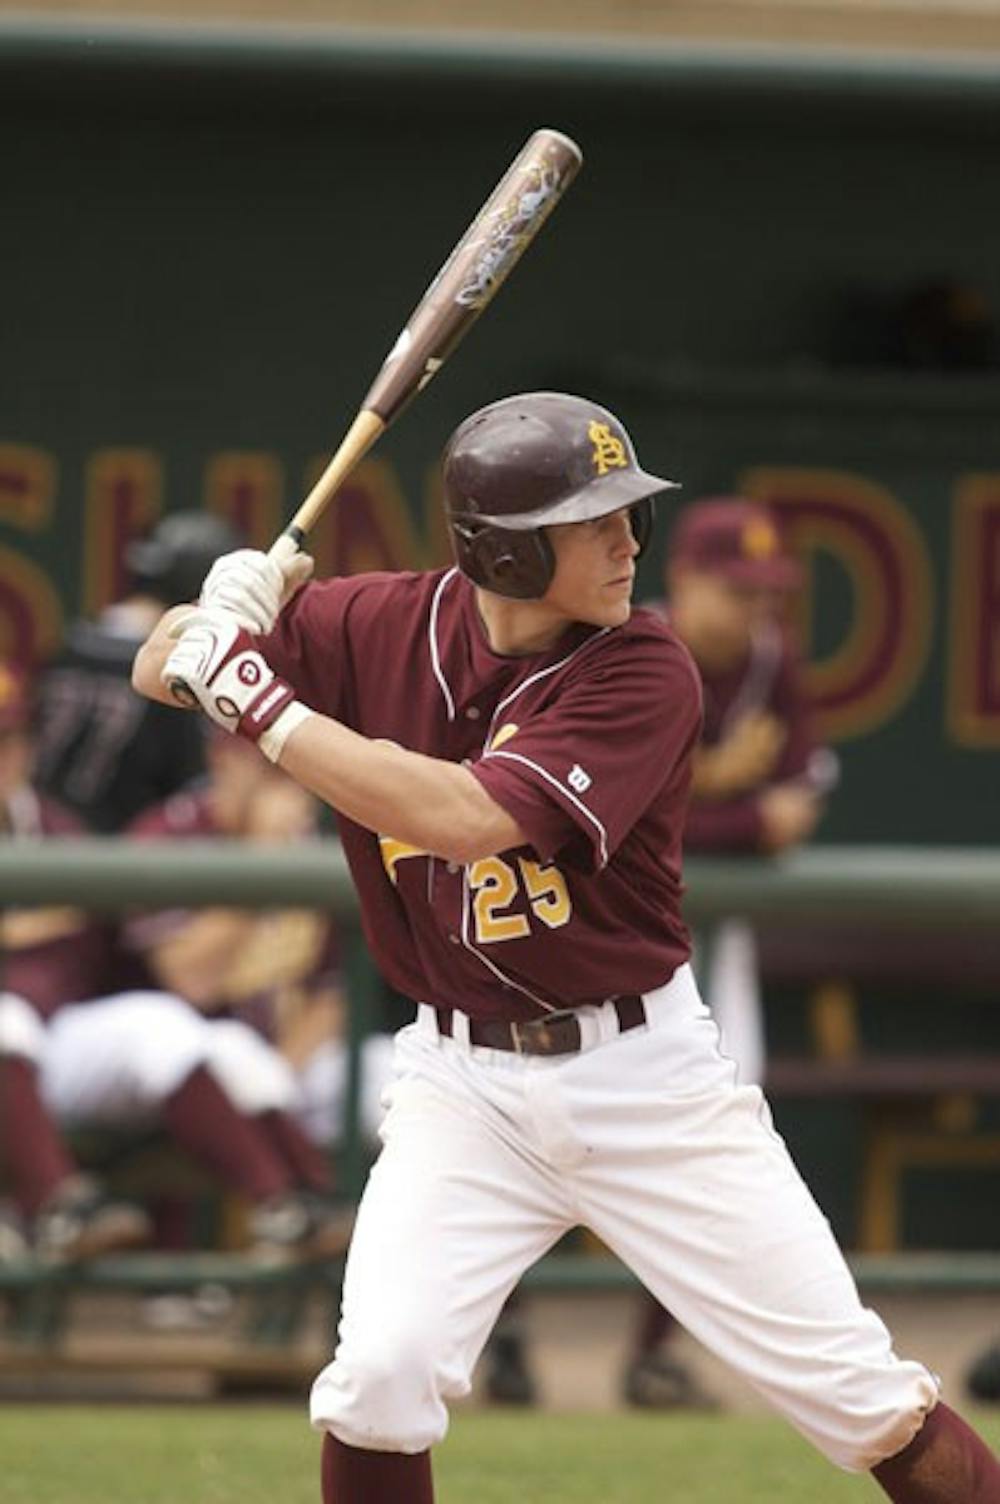 DEVILS DOWN: ASU sophomore infielder Zach Wilson had two hits in the Sun Devils’ 9-5 loss to Washington State on Sunday afternoon in Pullman, Wash. (Photo by Scott Stuk)